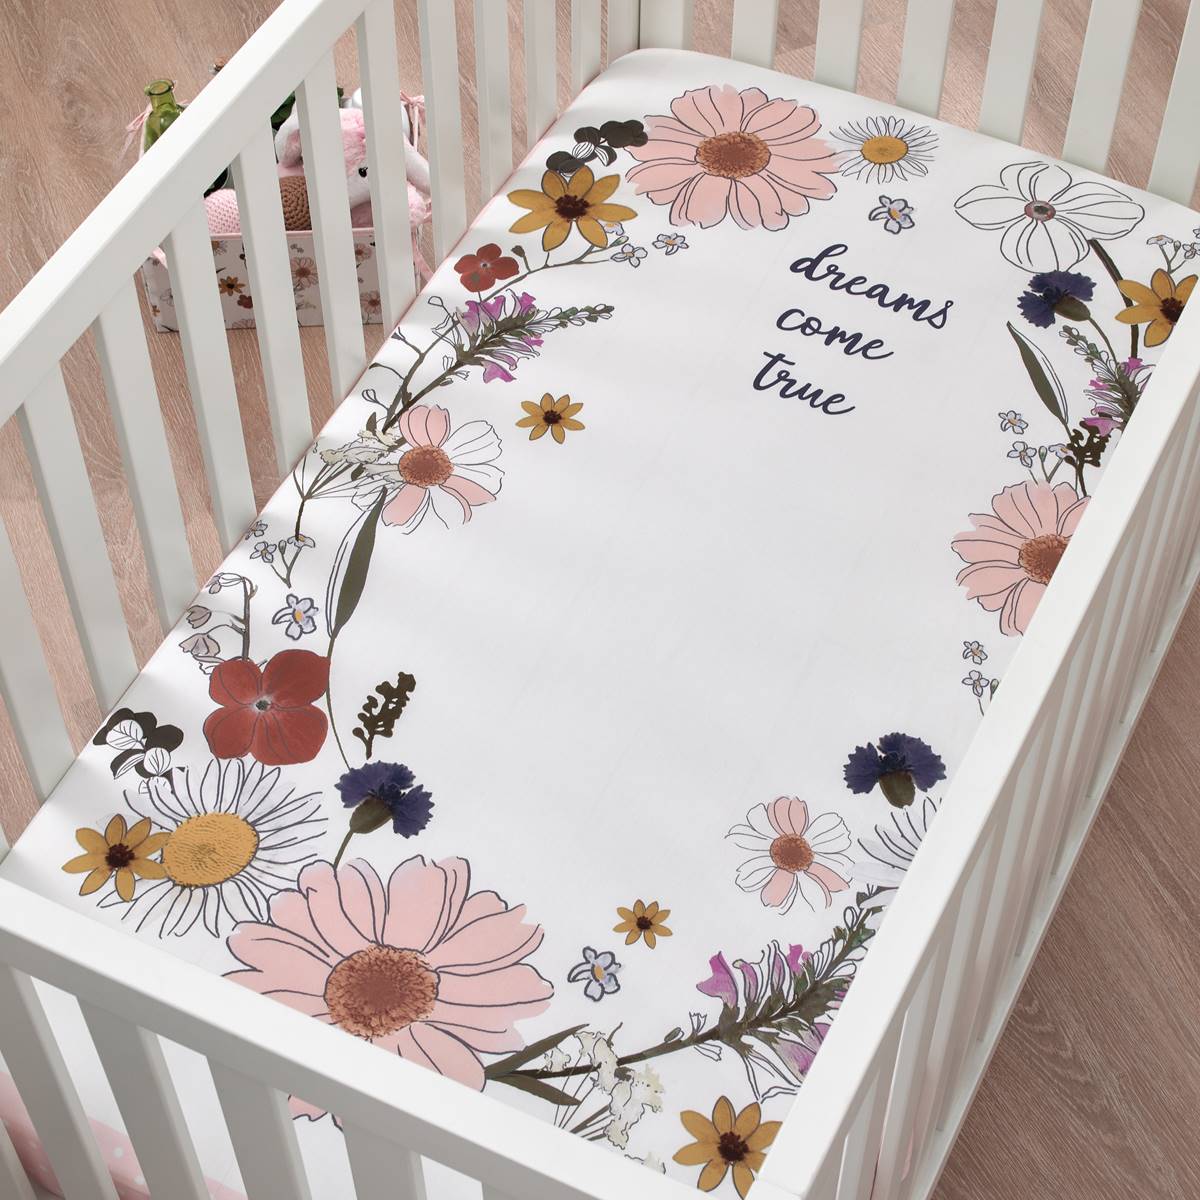 NoJo Keep Blooming Photo Op Fitted Crib Sheet